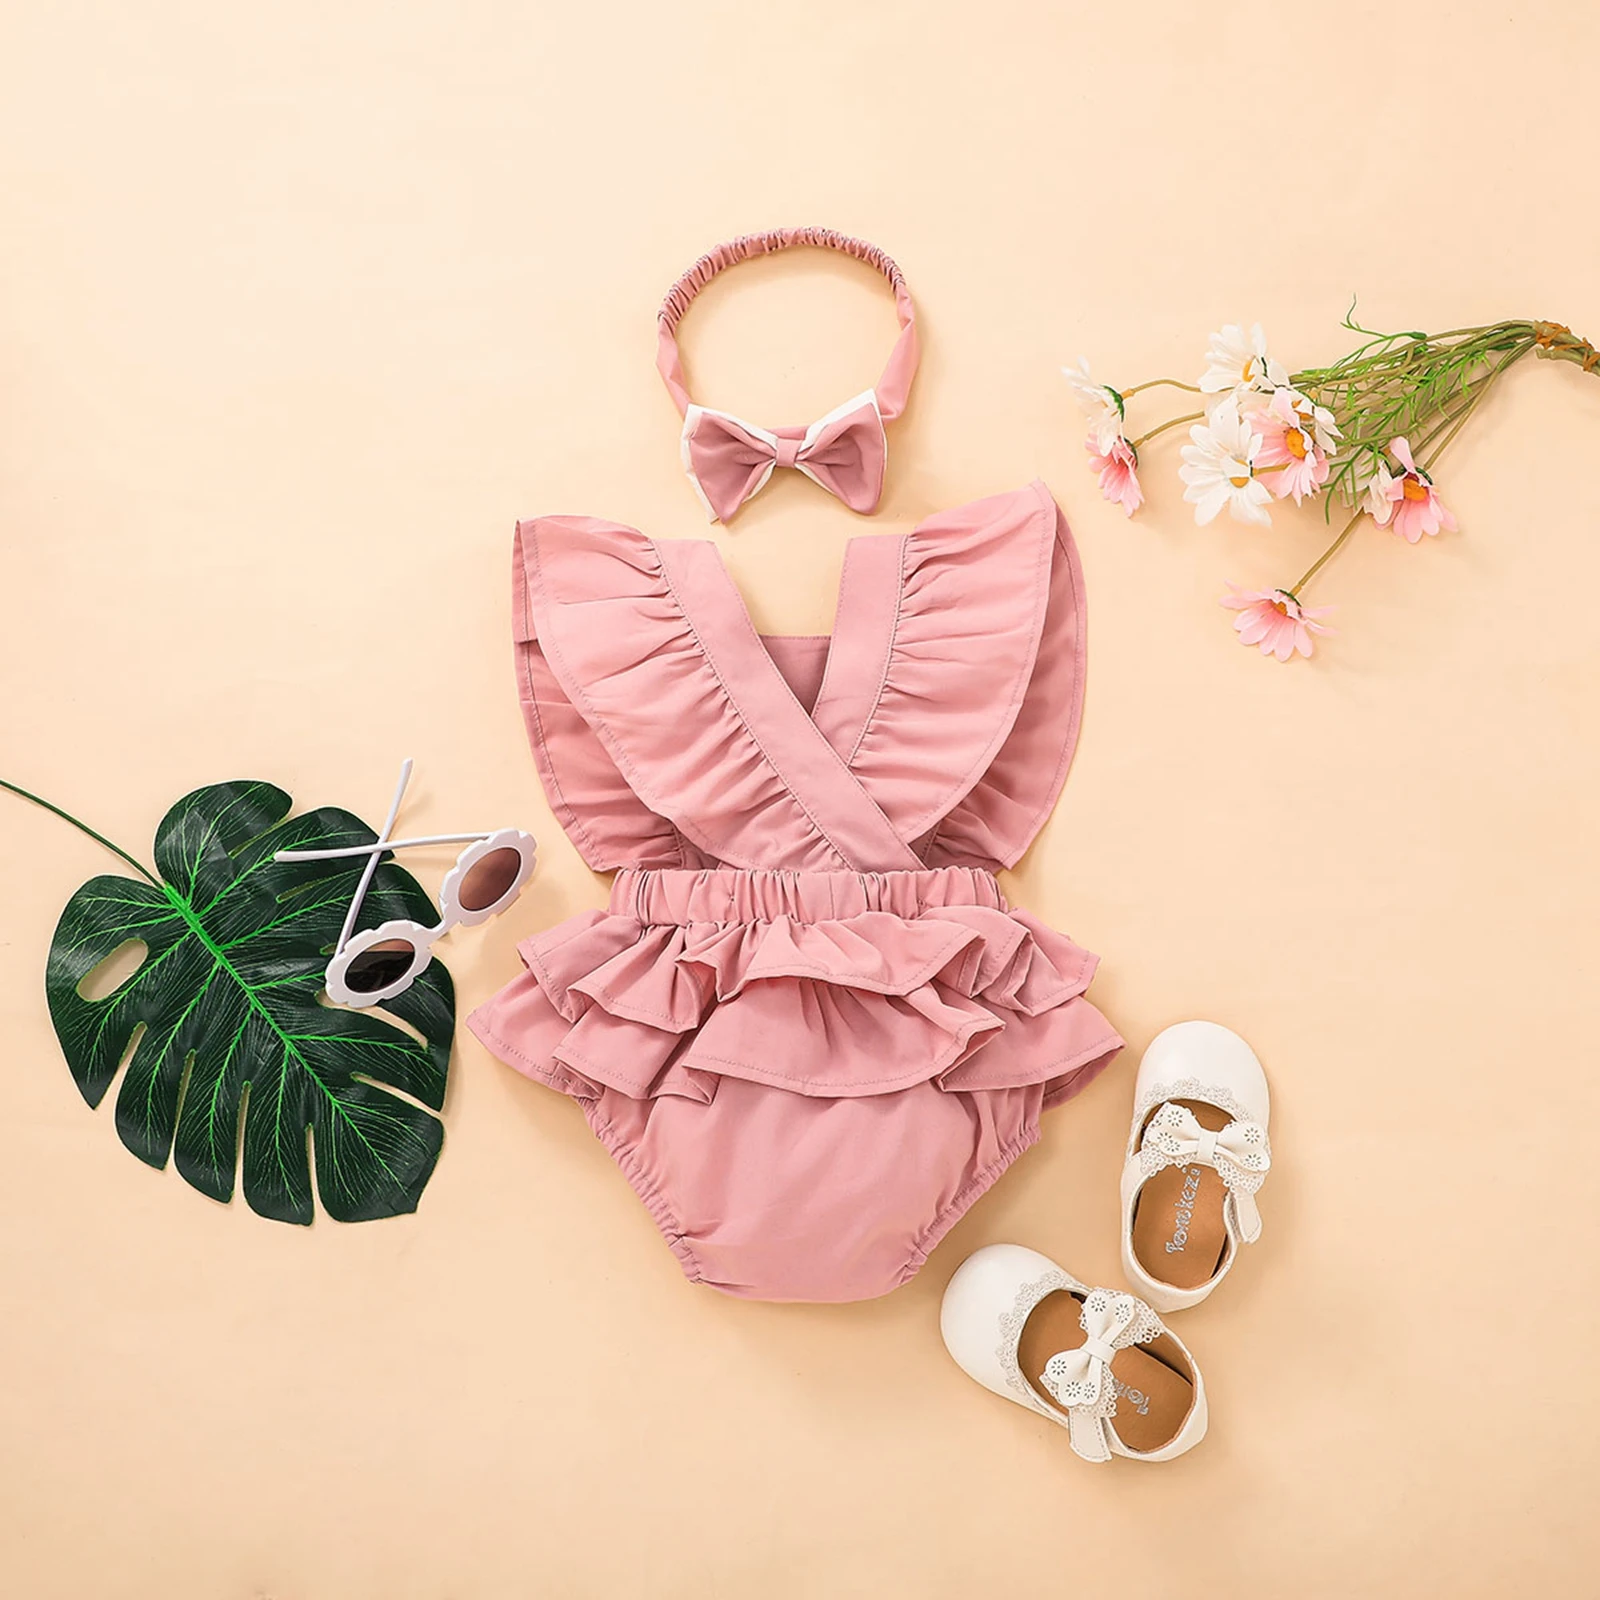 cool baby bodysuits	 Ma&Baby 0-18M Newborn Infant Baby Girl Romper Bow Ruffle Jumpsuit Overalls Cute Toddler Girl Summer Clothing Costumes D01 bulk baby bodysuits	